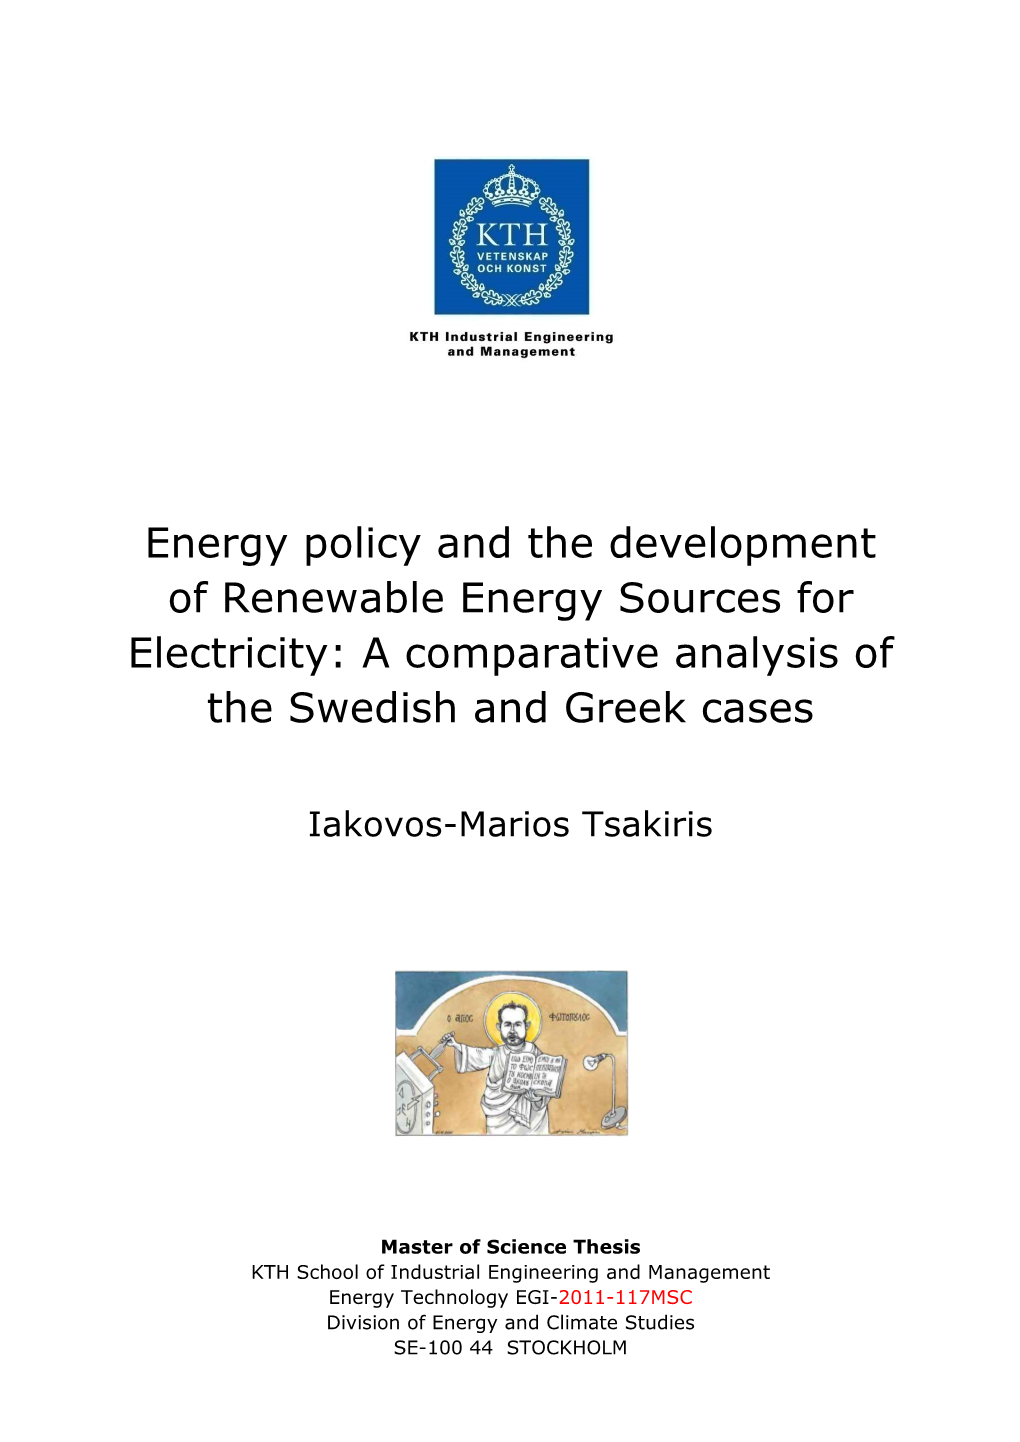 A Comparative Analysis of the Swedish and Greek Cases